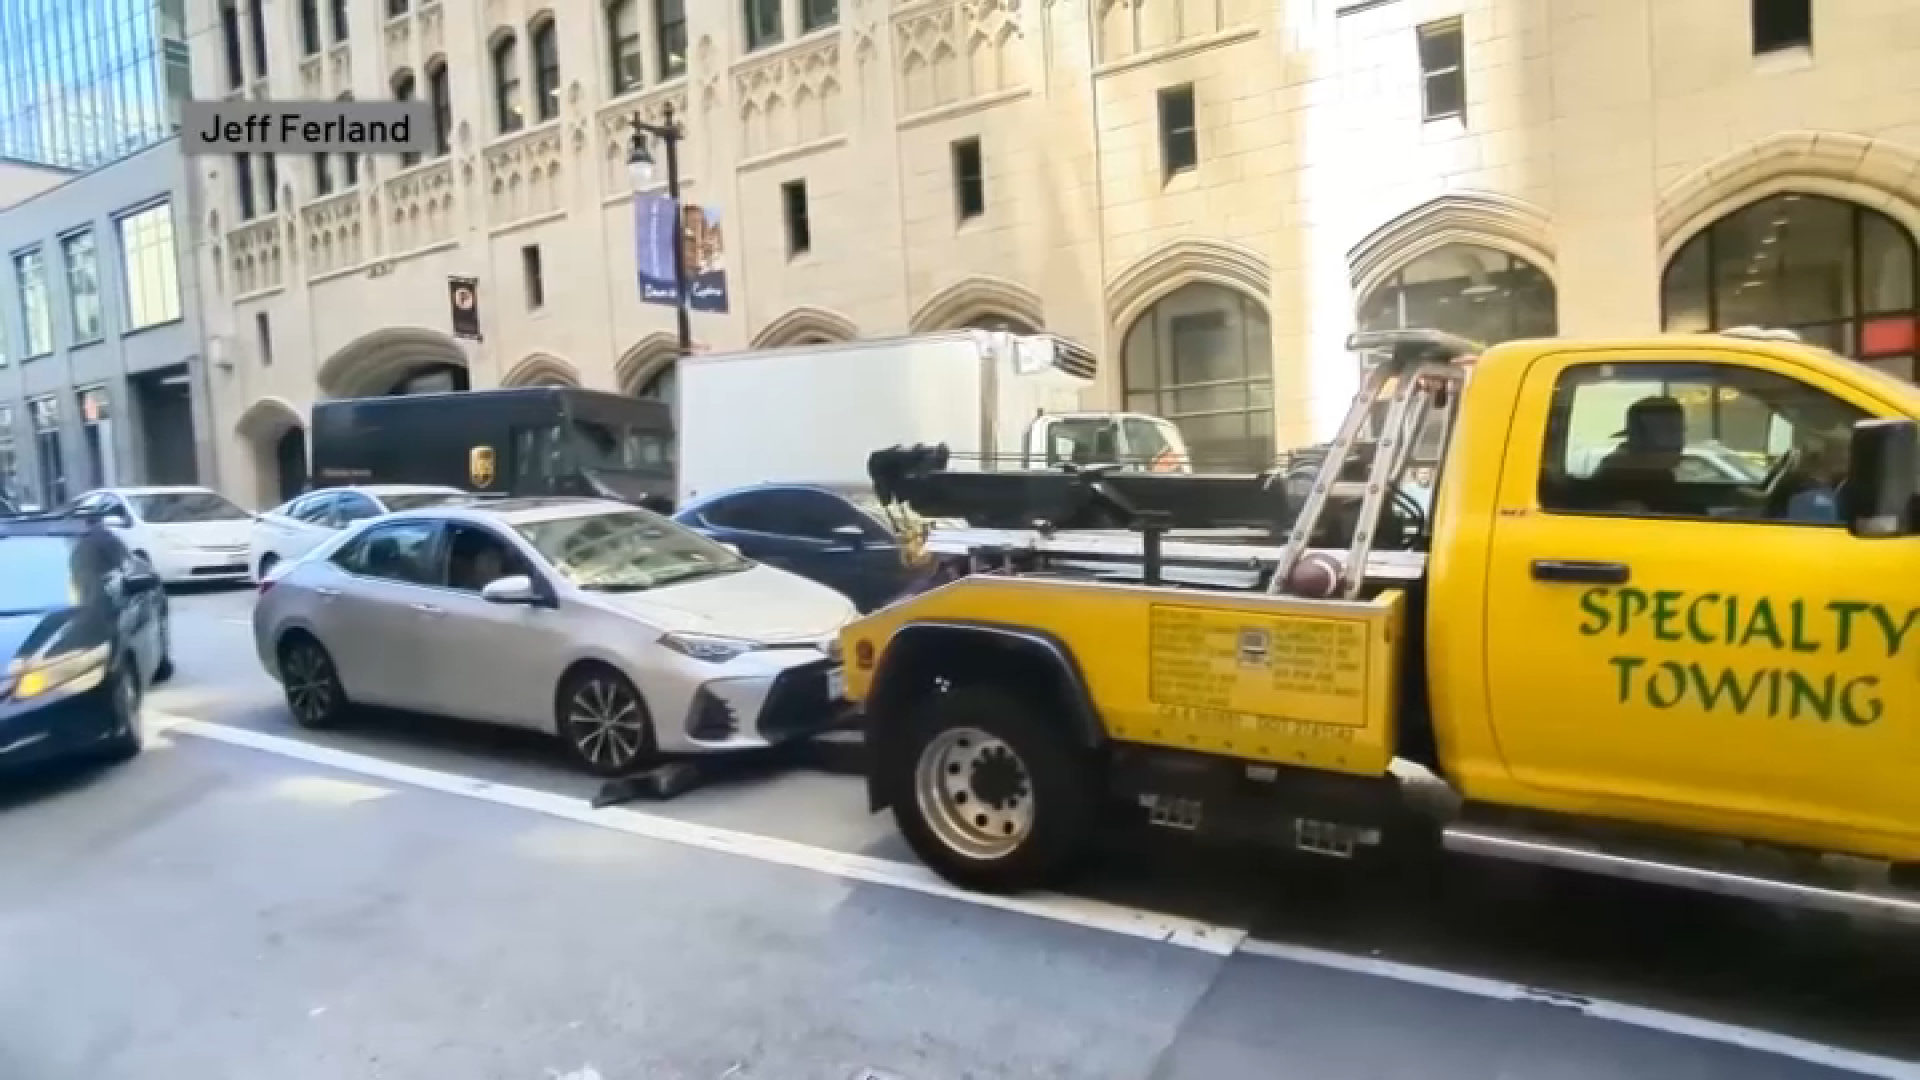 Tow truck tries to latch onto moving car in San Francisco – NBC Bay Area